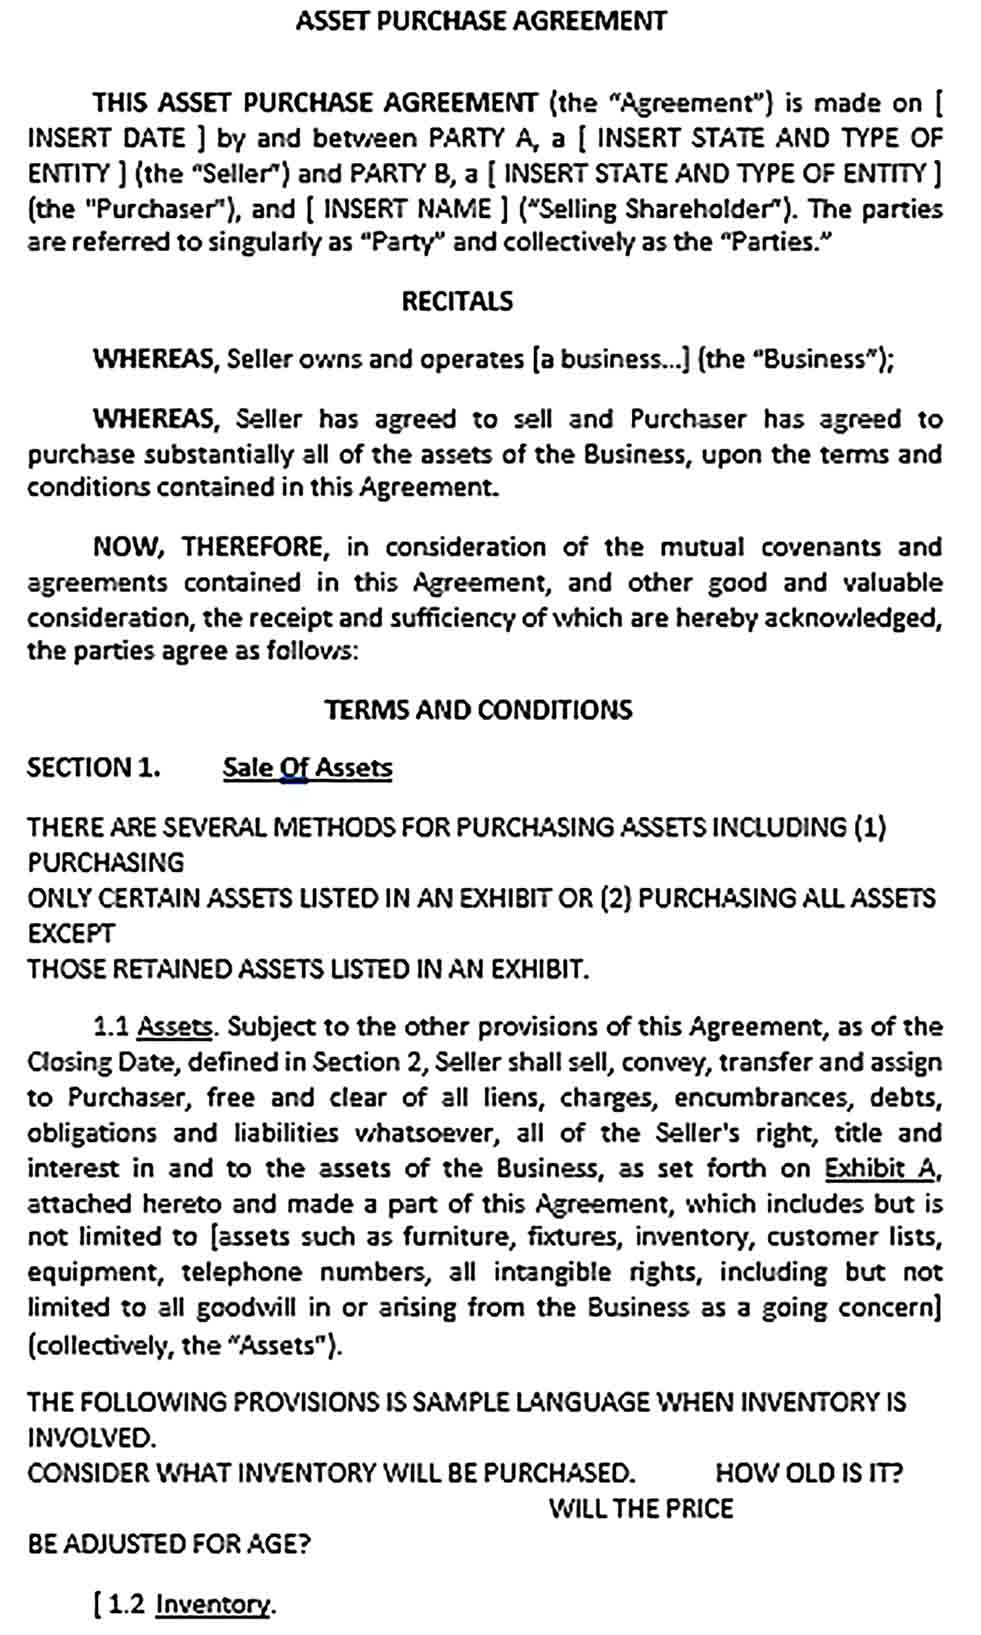 Sample Asset Purchase Agreement